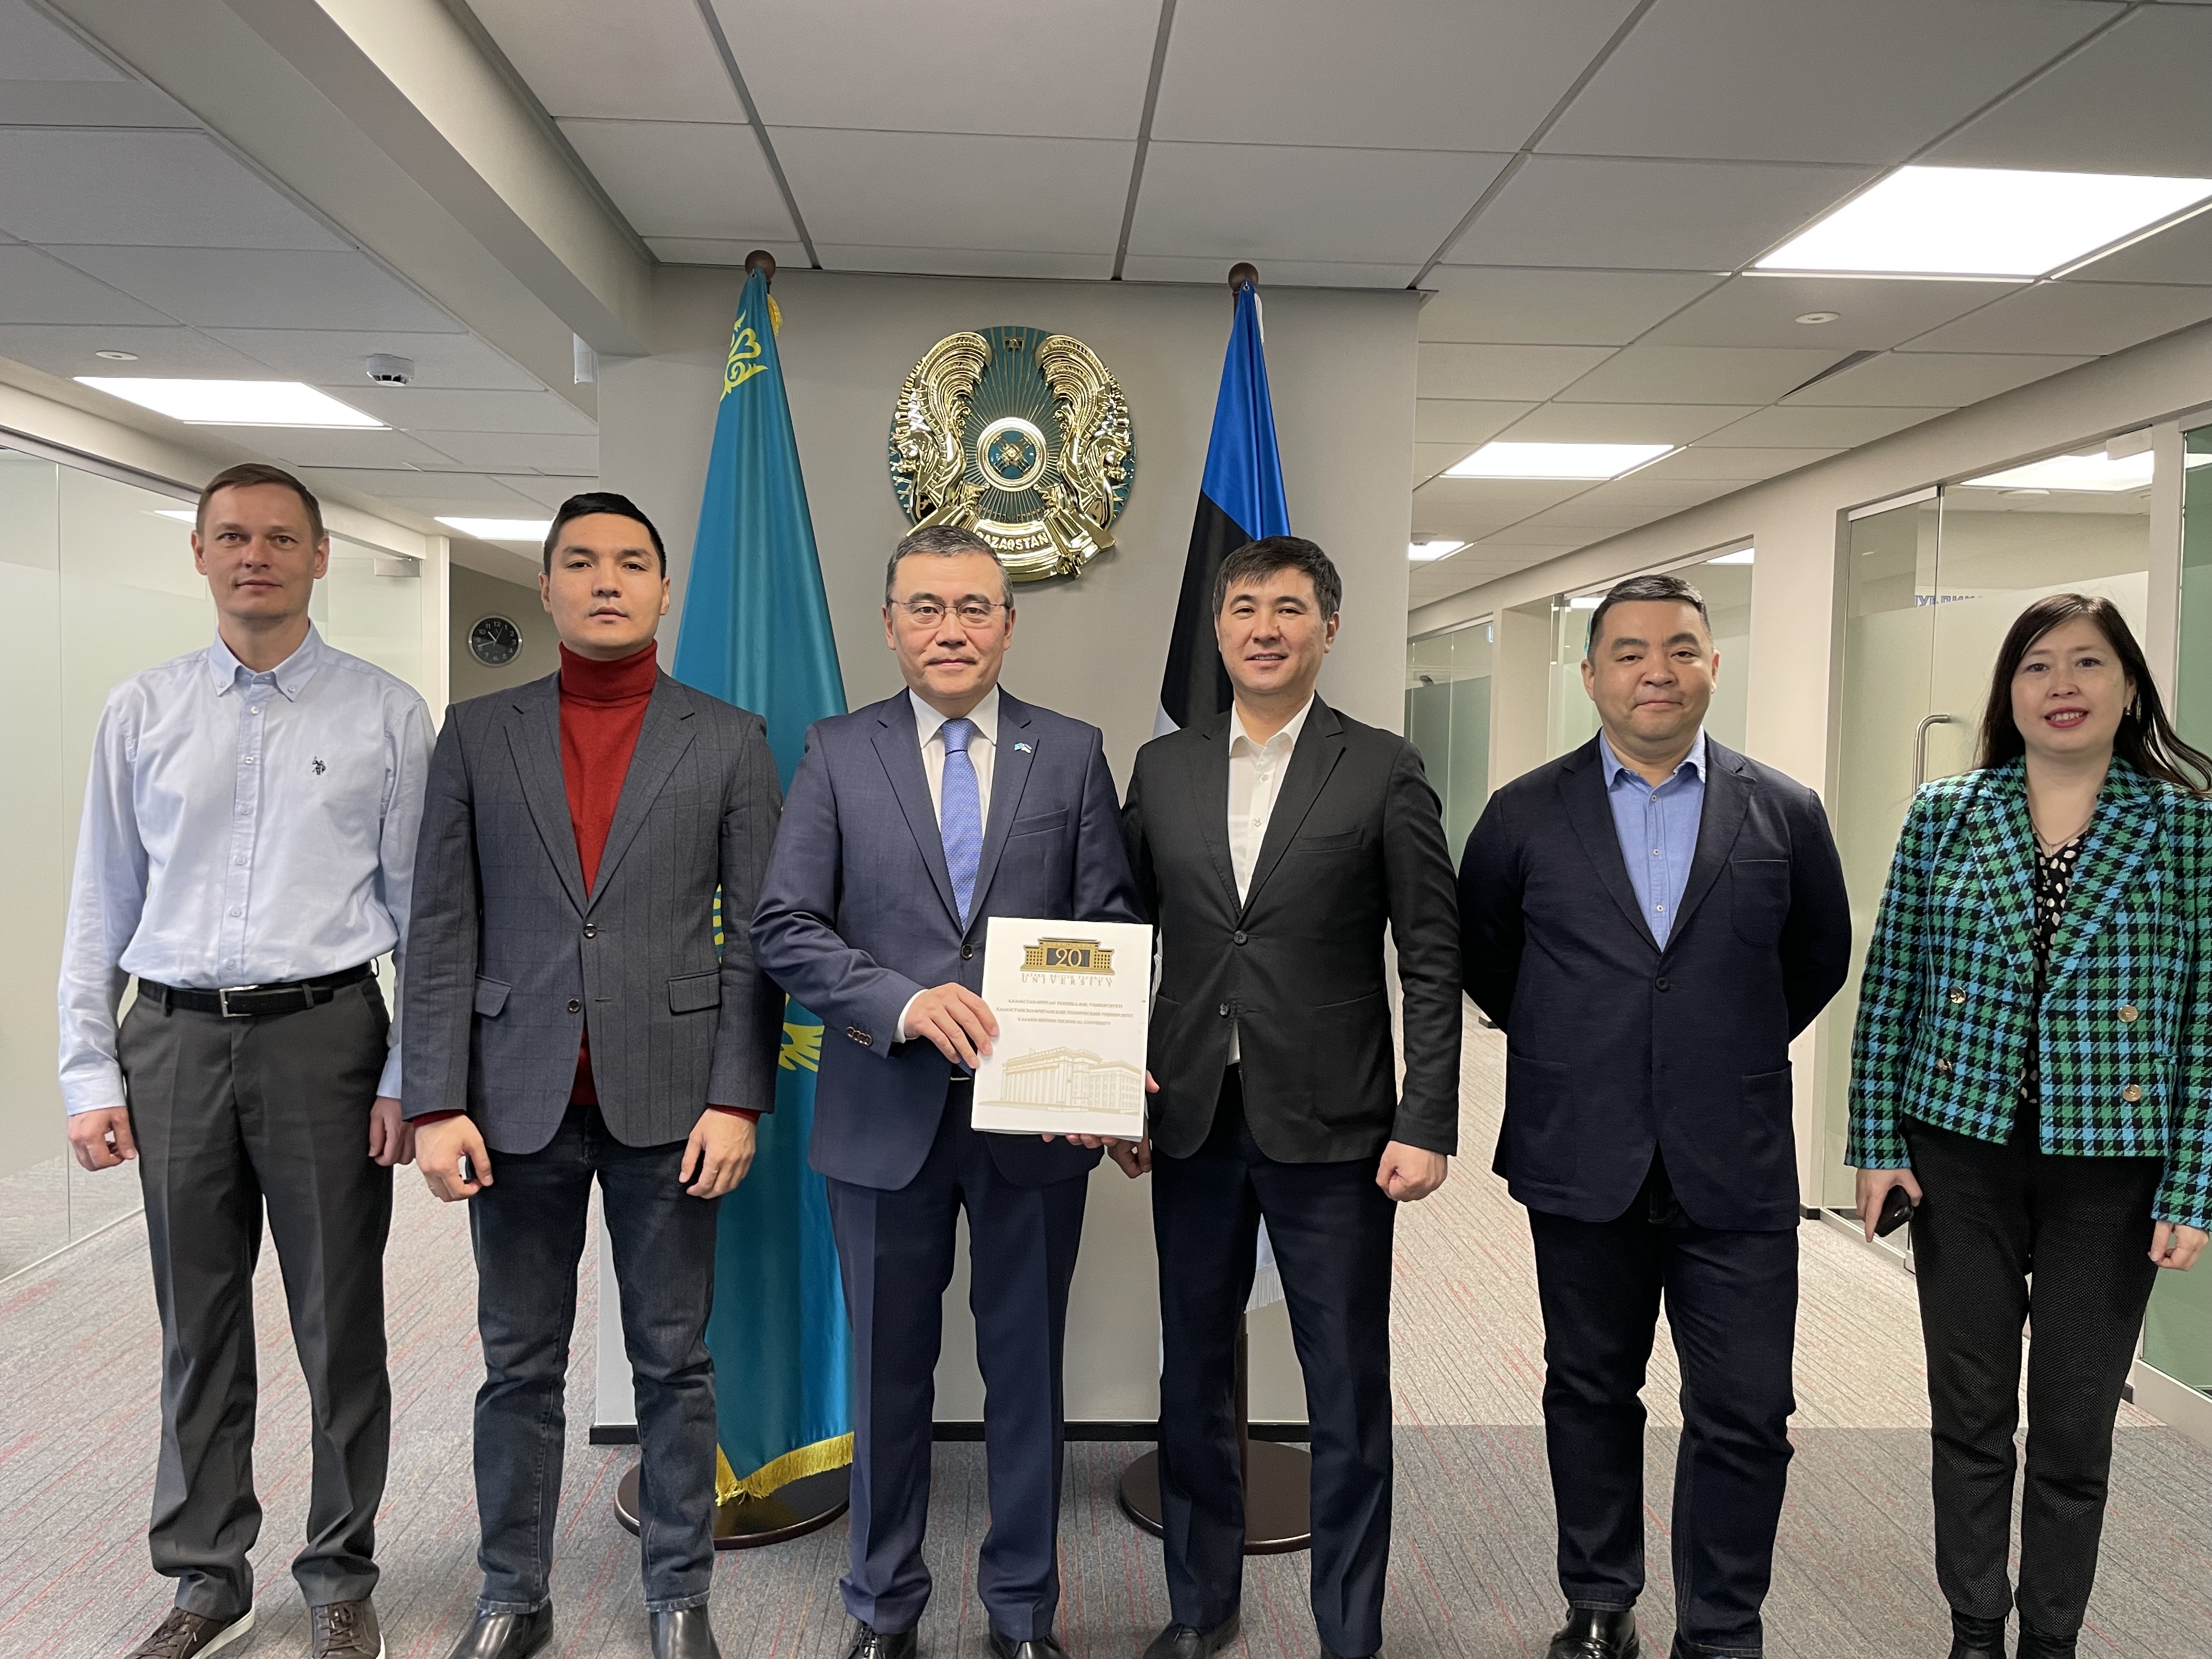 Kazakhstan and Estonia strengthen cooperation in the fields of education and IT technologies